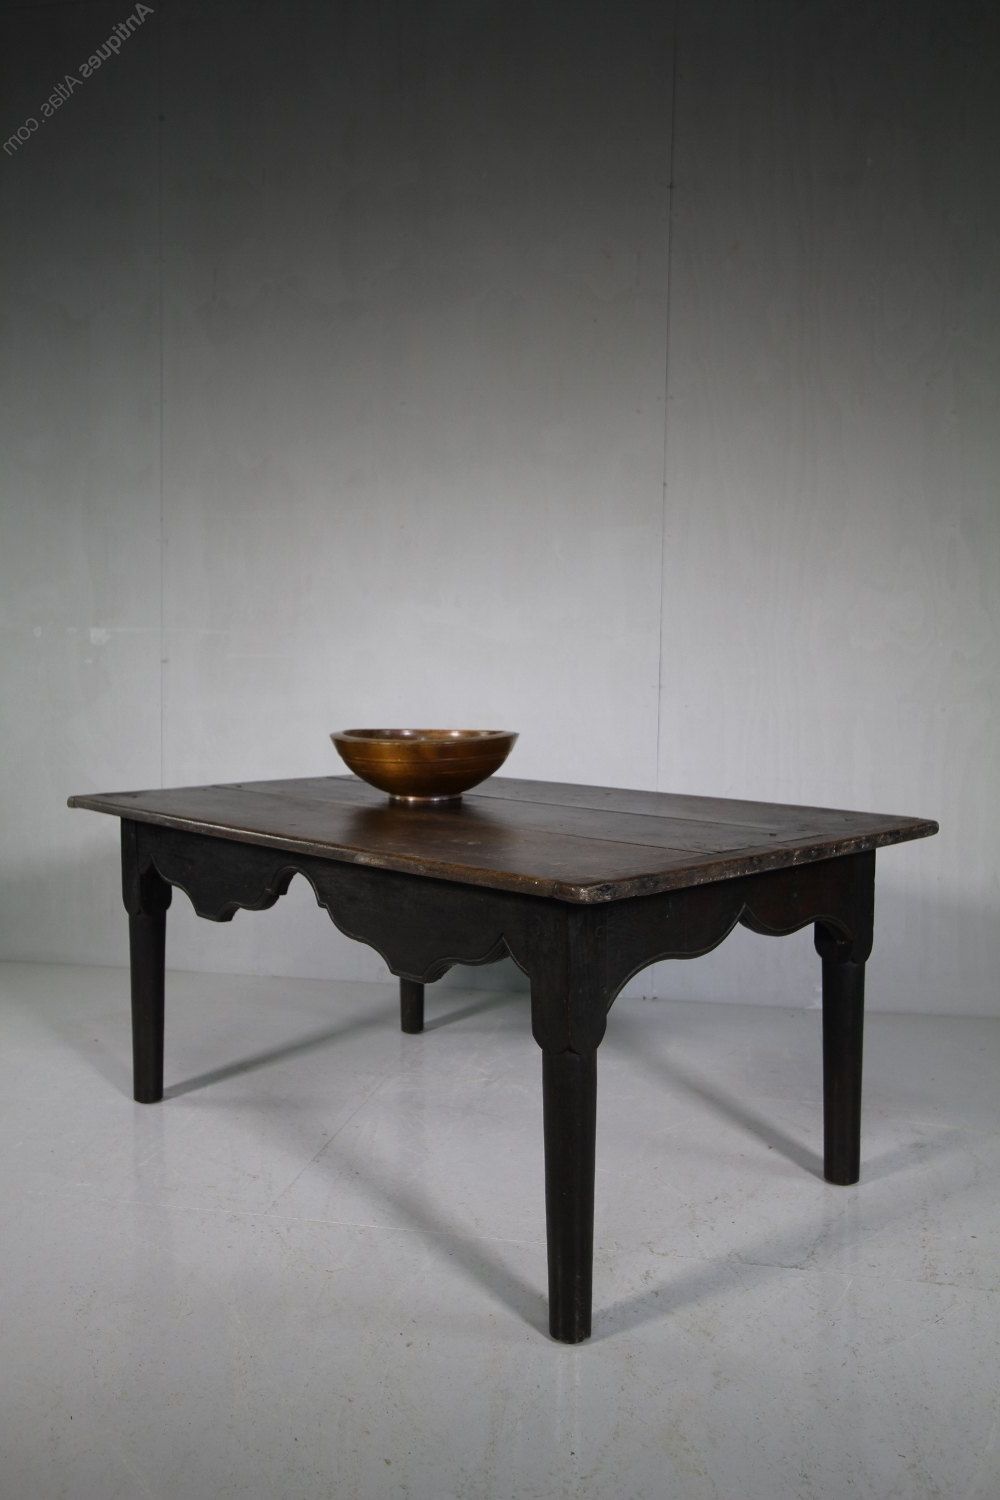 Popular Early 18th Century Antique Oak Low Coffee Table Inside Vintage Gray Oak Coffee Tables (View 12 of 20)